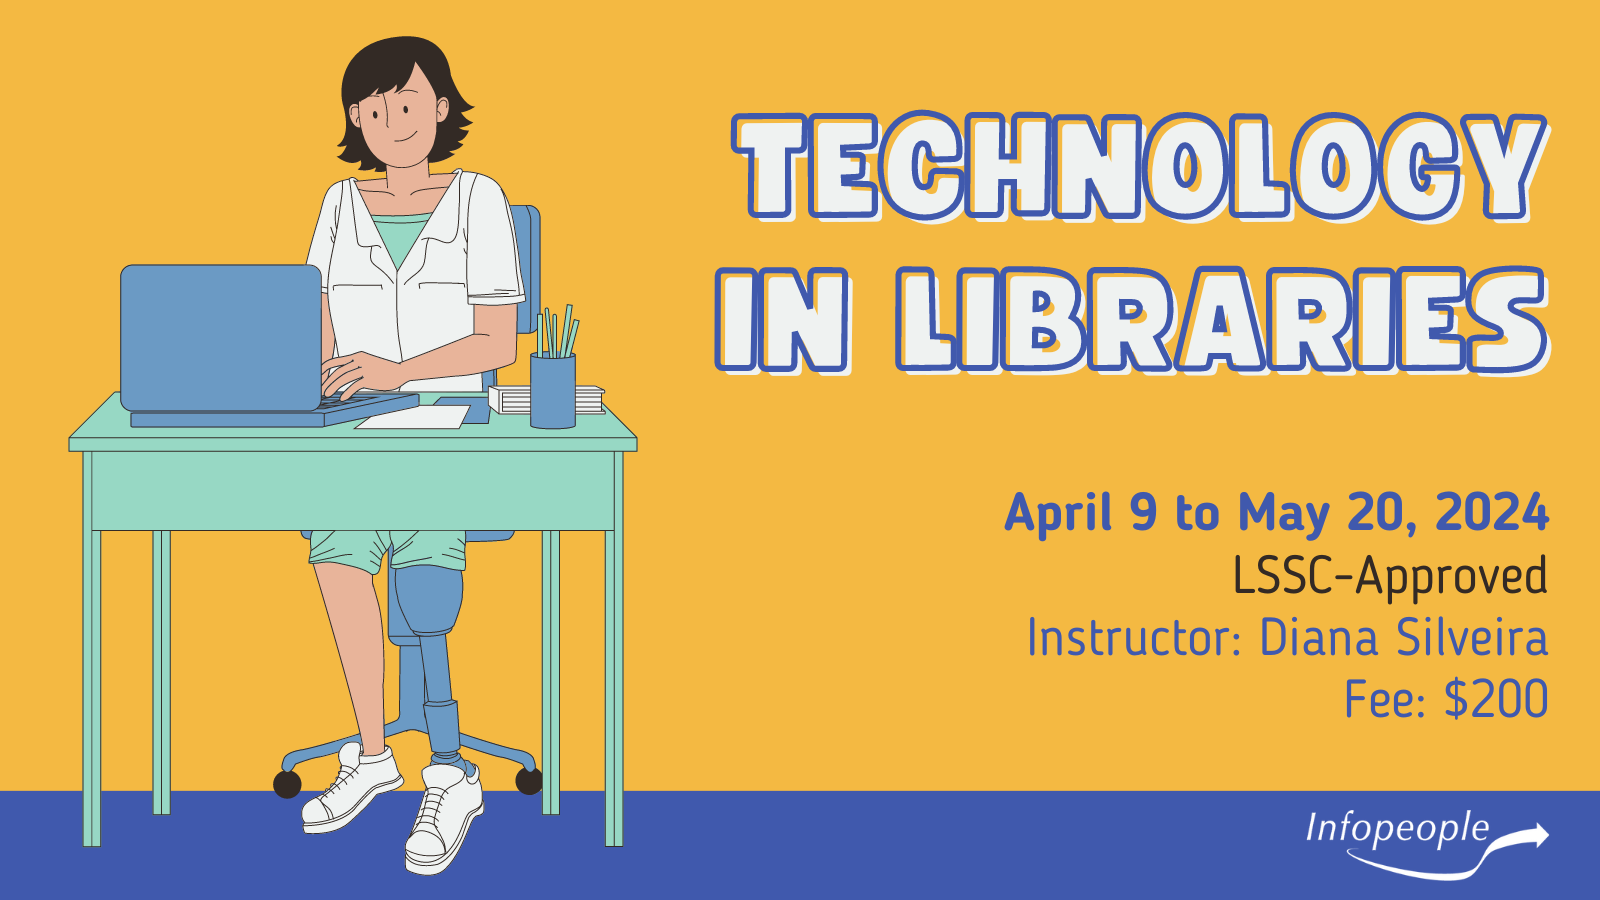 Library Supervision and Management- an Infopeople course. March 5 to April 15, 2024. LSSC-approved. Instructor: Heidi Dolamore. Fee: $200. A woman, holding a clipboard, is rating and reviewing an employee.